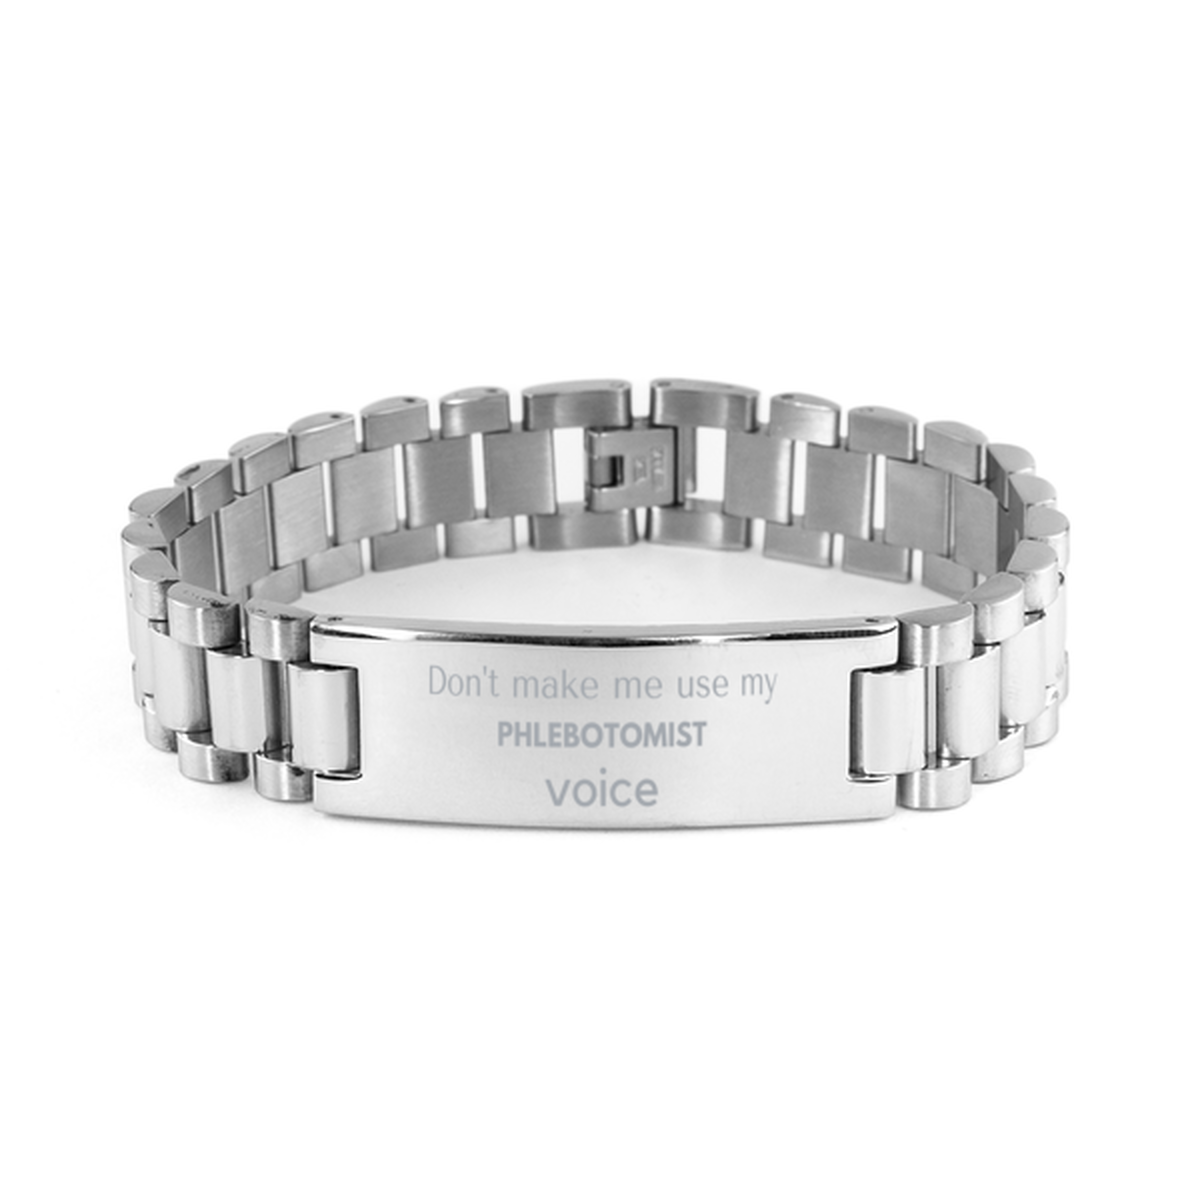 Don't make me use my Phlebotomist voice, Sarcasm Phlebotomist Gifts, Christmas Phlebotomist Ladder Stainless Steel Bracelet Birthday Unique Gifts For Phlebotomist Coworkers, Men, Women, Colleague, Friends